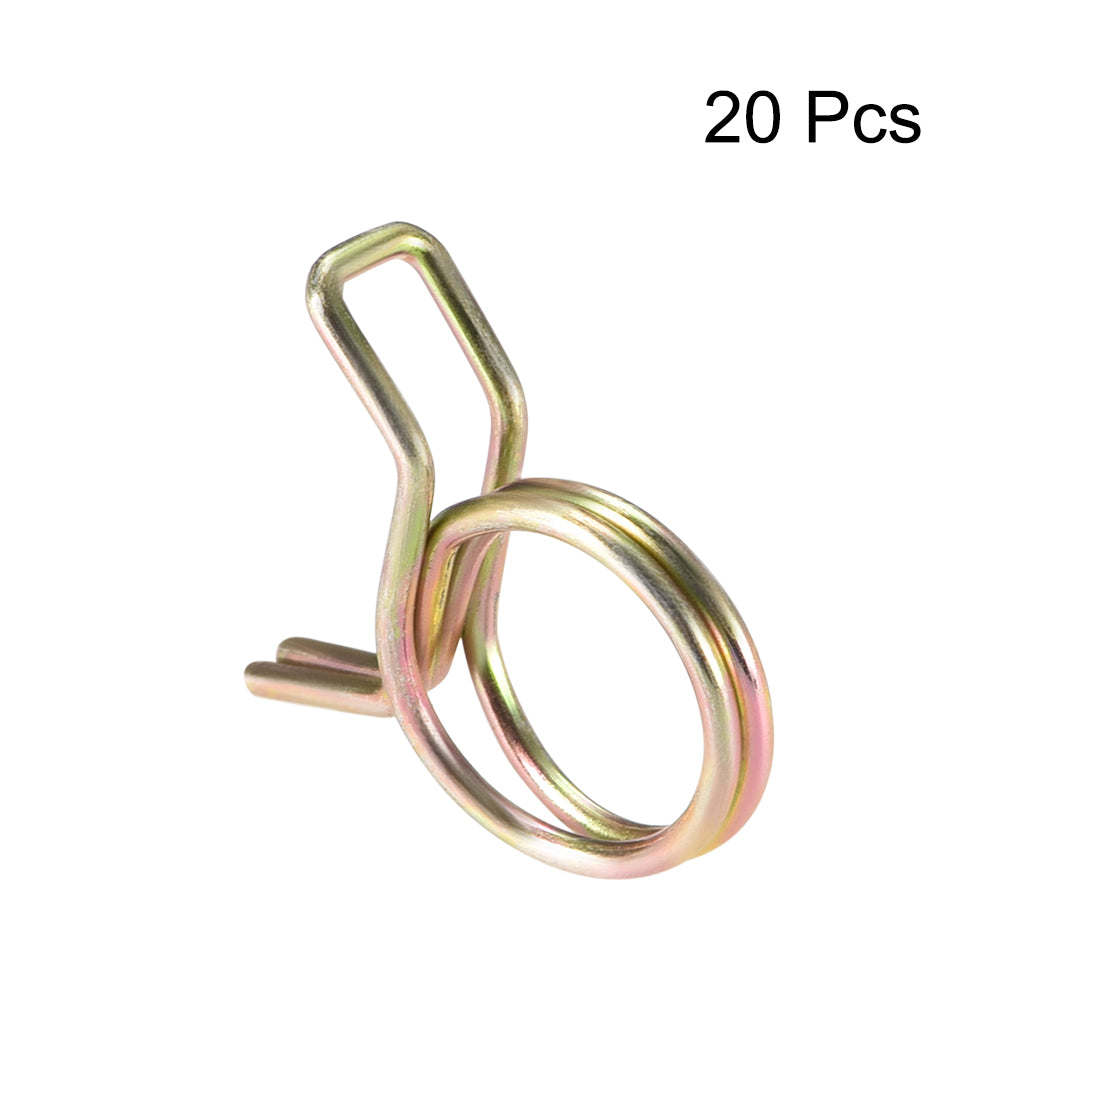 uxcell Uxcell Double Wire Spring Hose Clamp 11mm Fuel Line Tube Spring Clips Zinc Plated 20Pcs